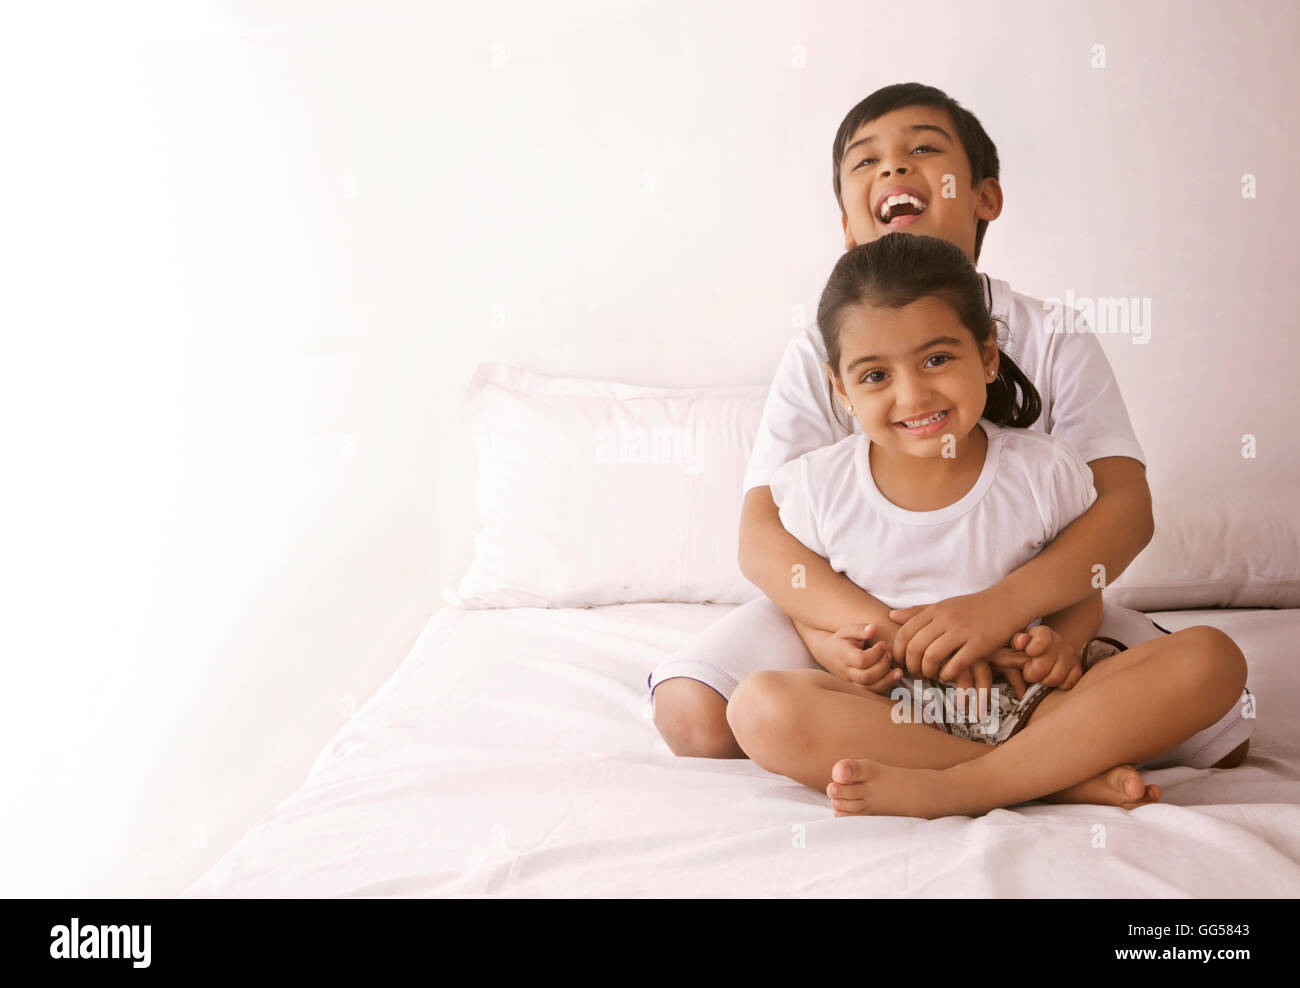 Portrait of happy girl being embraced by brother in bed Stock Photo